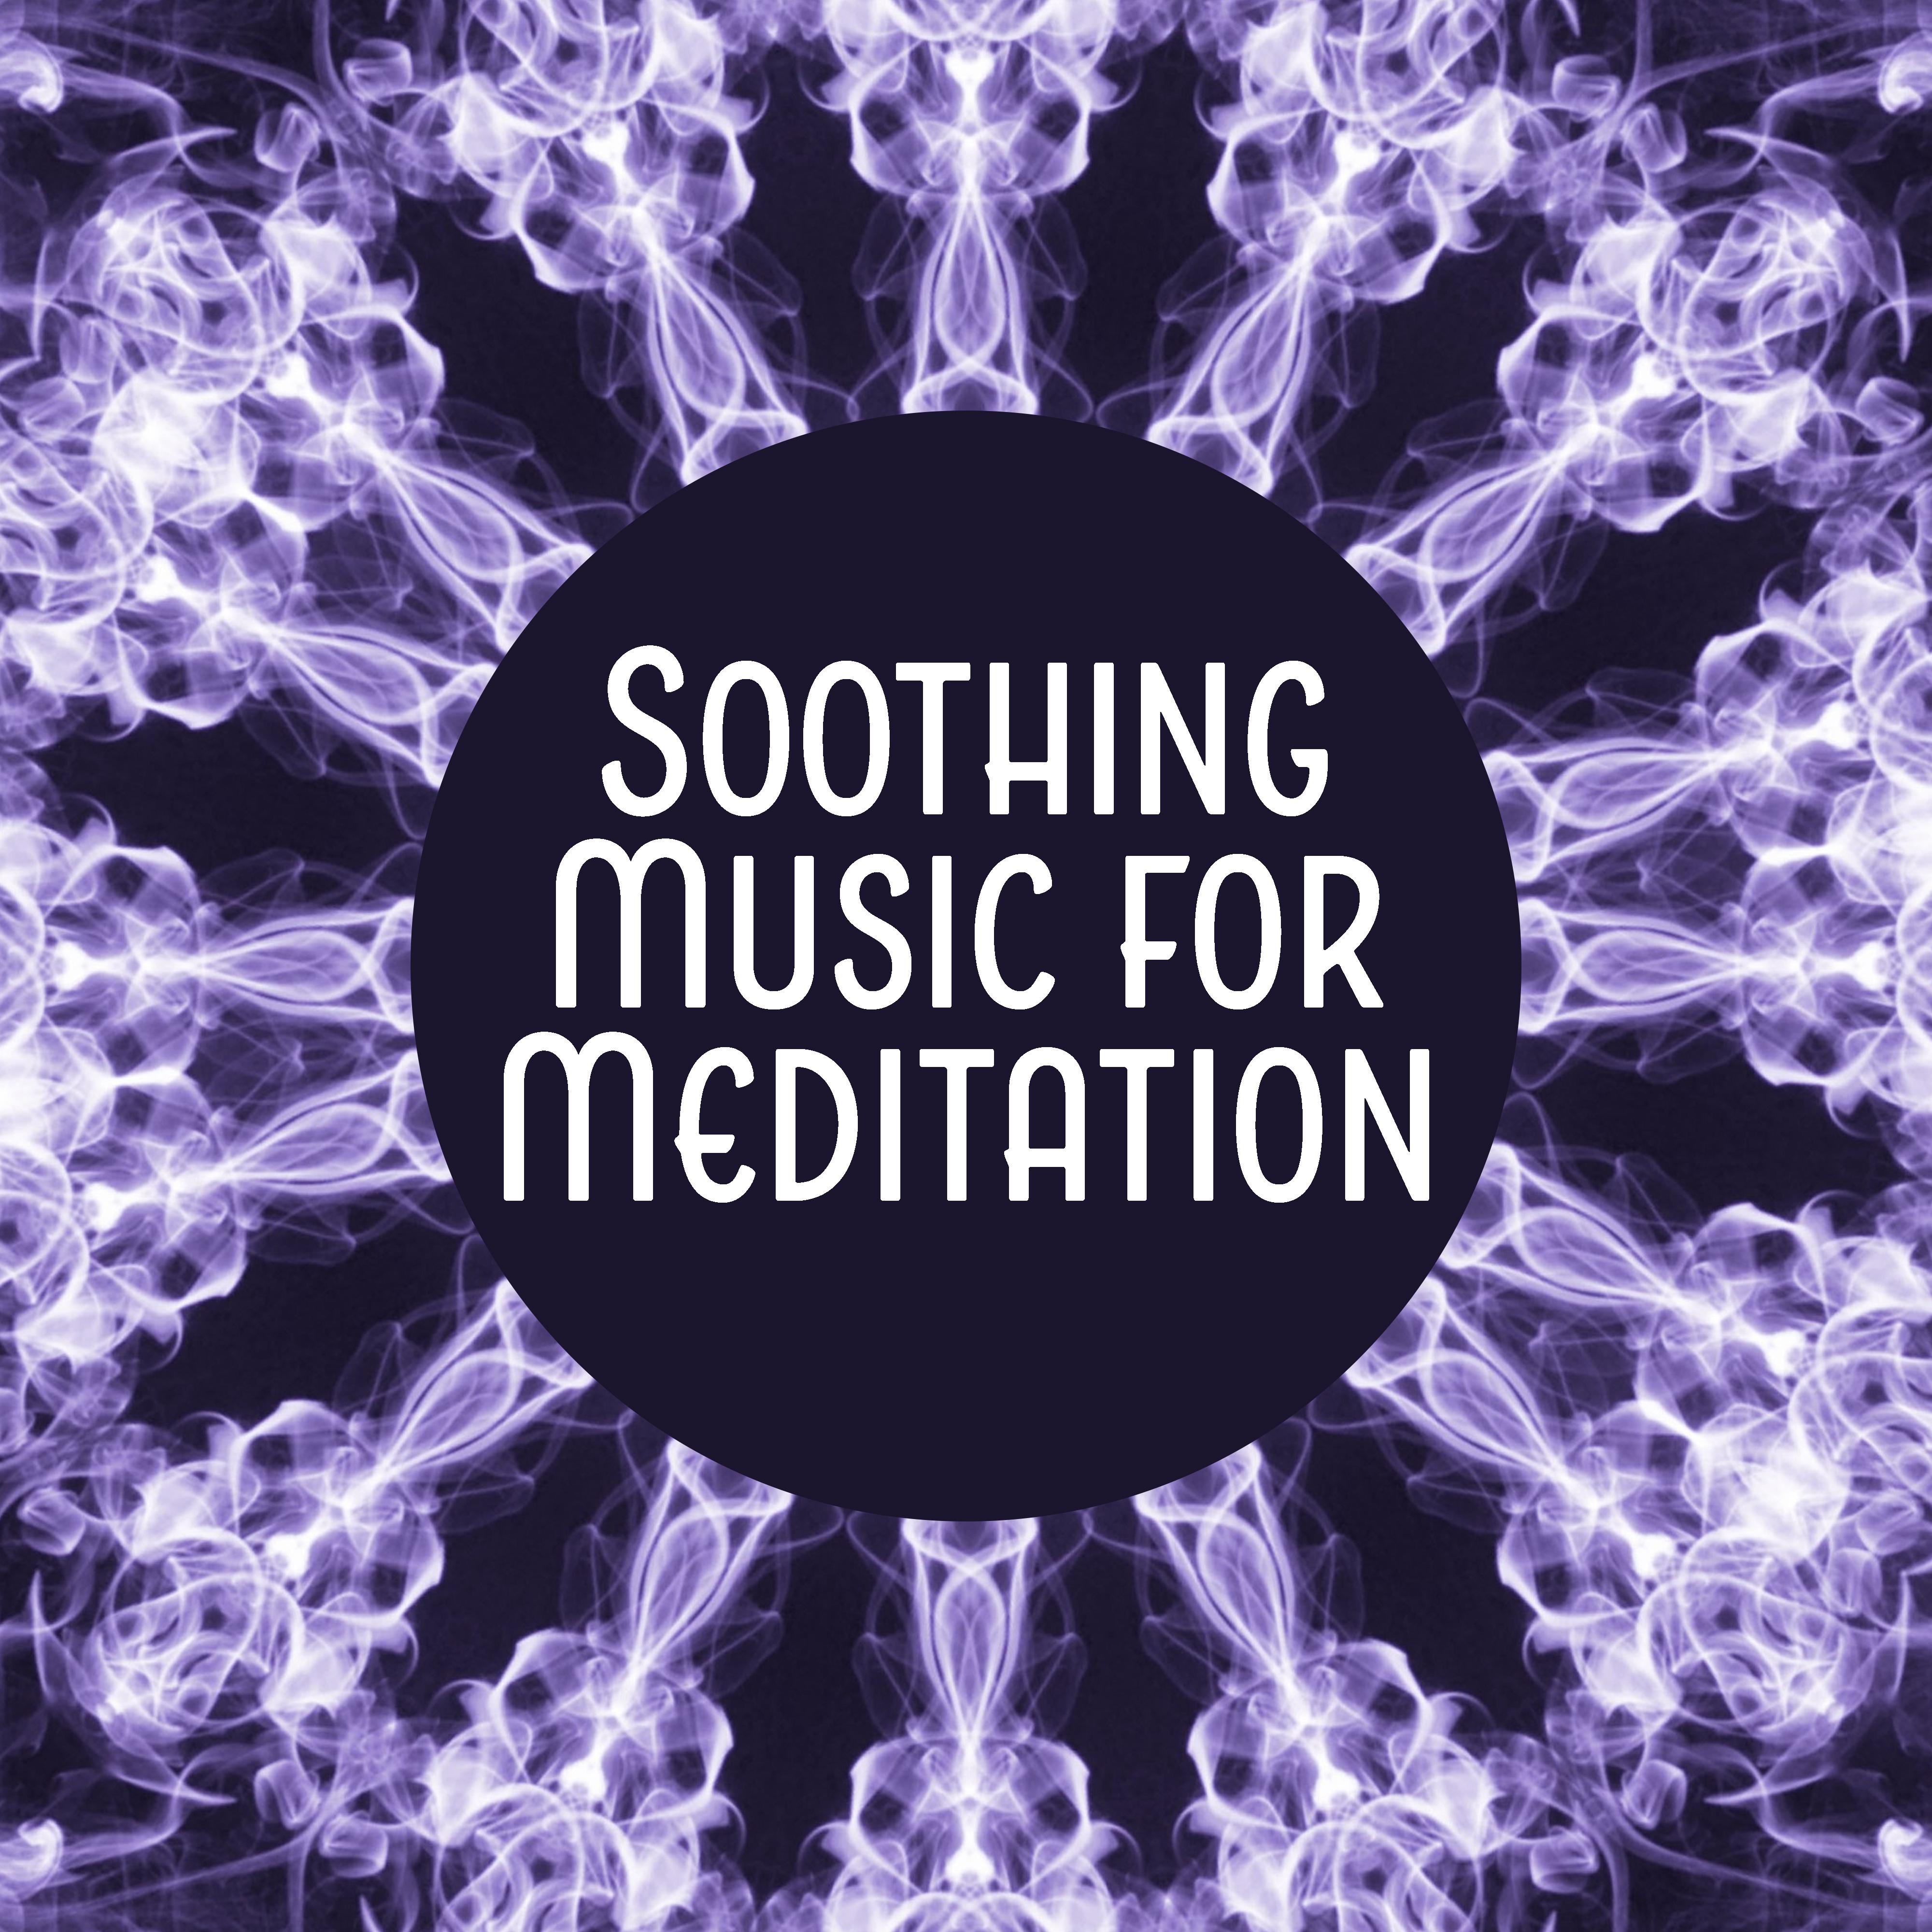 Soothing Music for Meditation – Training Yoga, Inner Zen, Meditate, Pure Relaxation, Peaceful Mind, Chakra Balancing